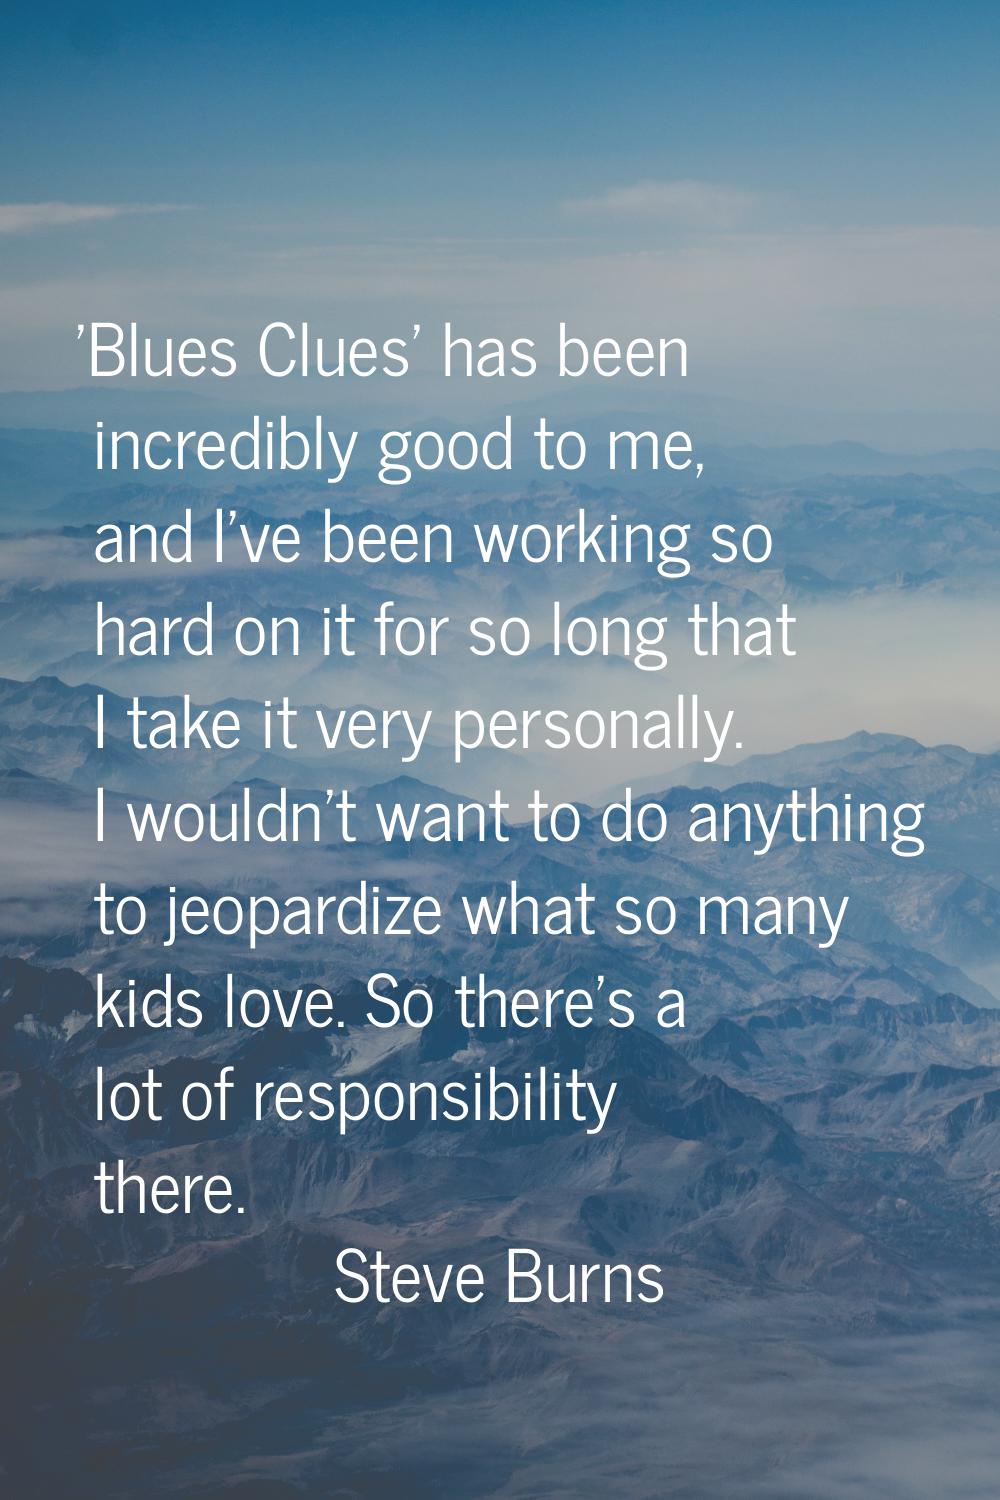 'Blues Clues' has been incredibly good to me, and I've been working so hard on it for so long that 